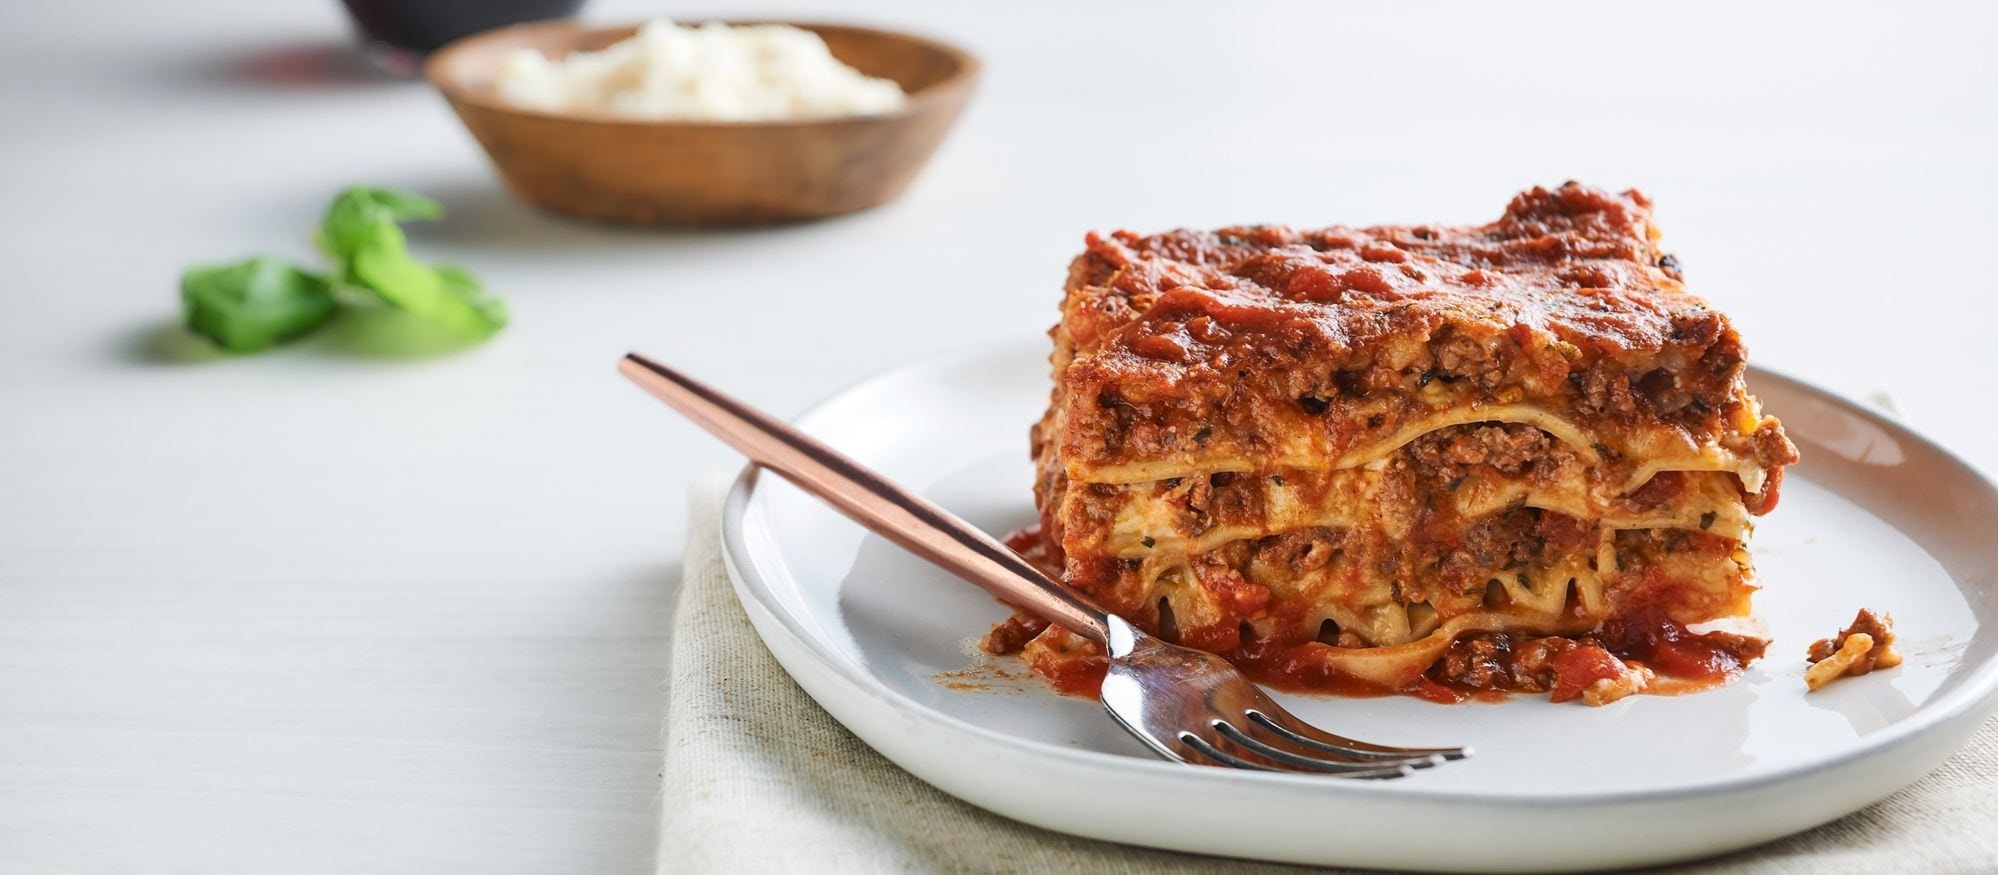 Traditional lasagna recipe from Sub-Zero, Wolf, and Cove